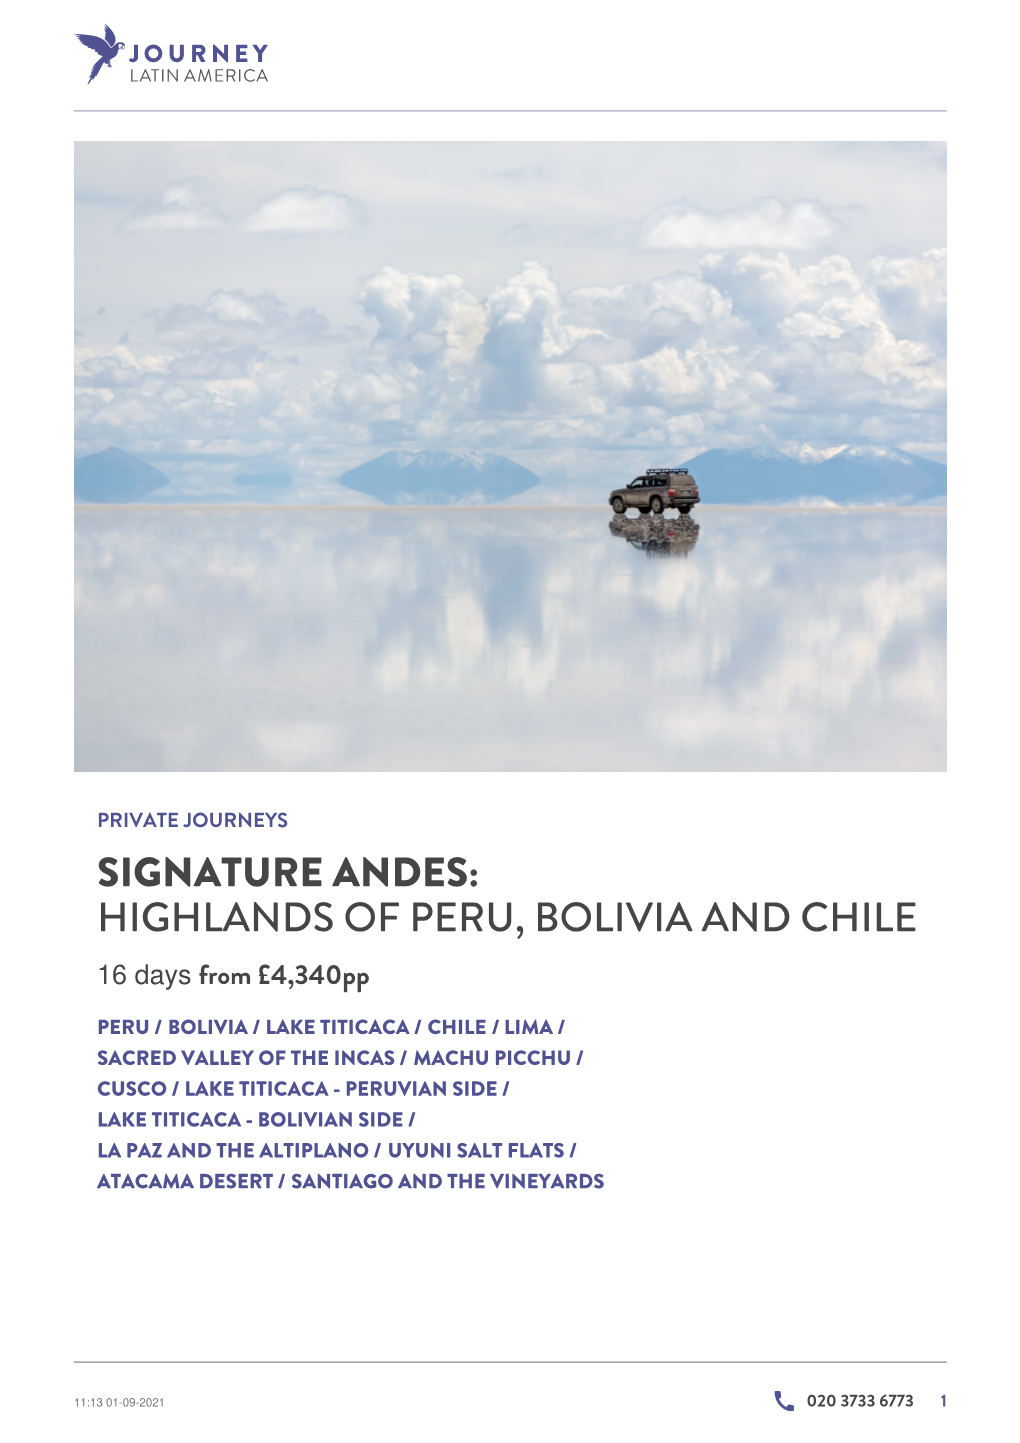 Signature Andes: Highlands of Peru, Bolivia and Chile